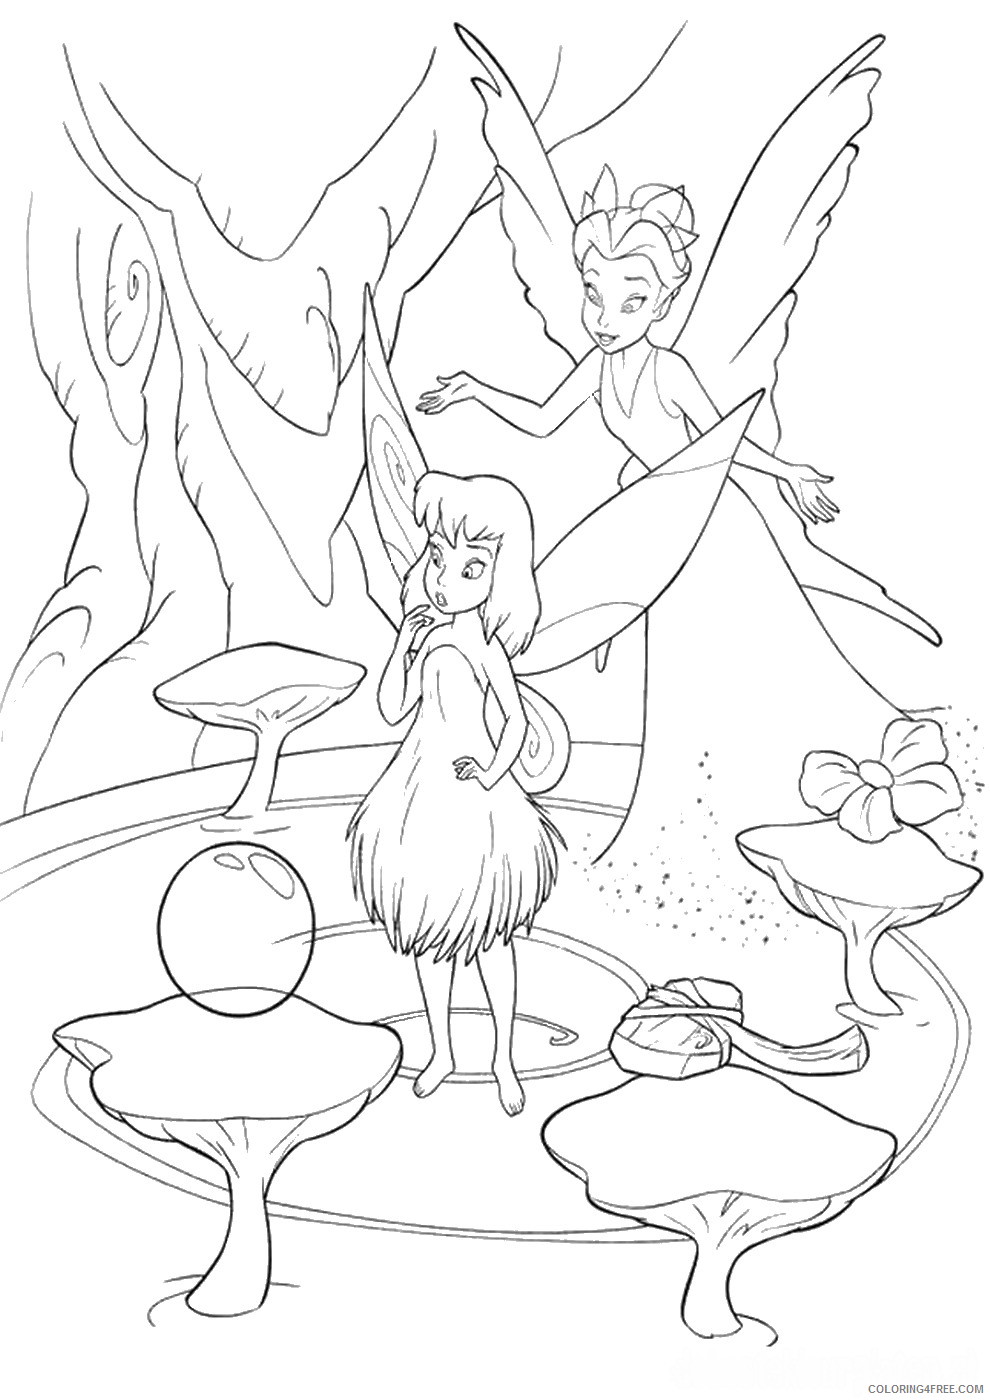 Tinker Bell Coloring Pages Cartoons tinkerbell_cl_17 Printable 2020 6624 Coloring4free